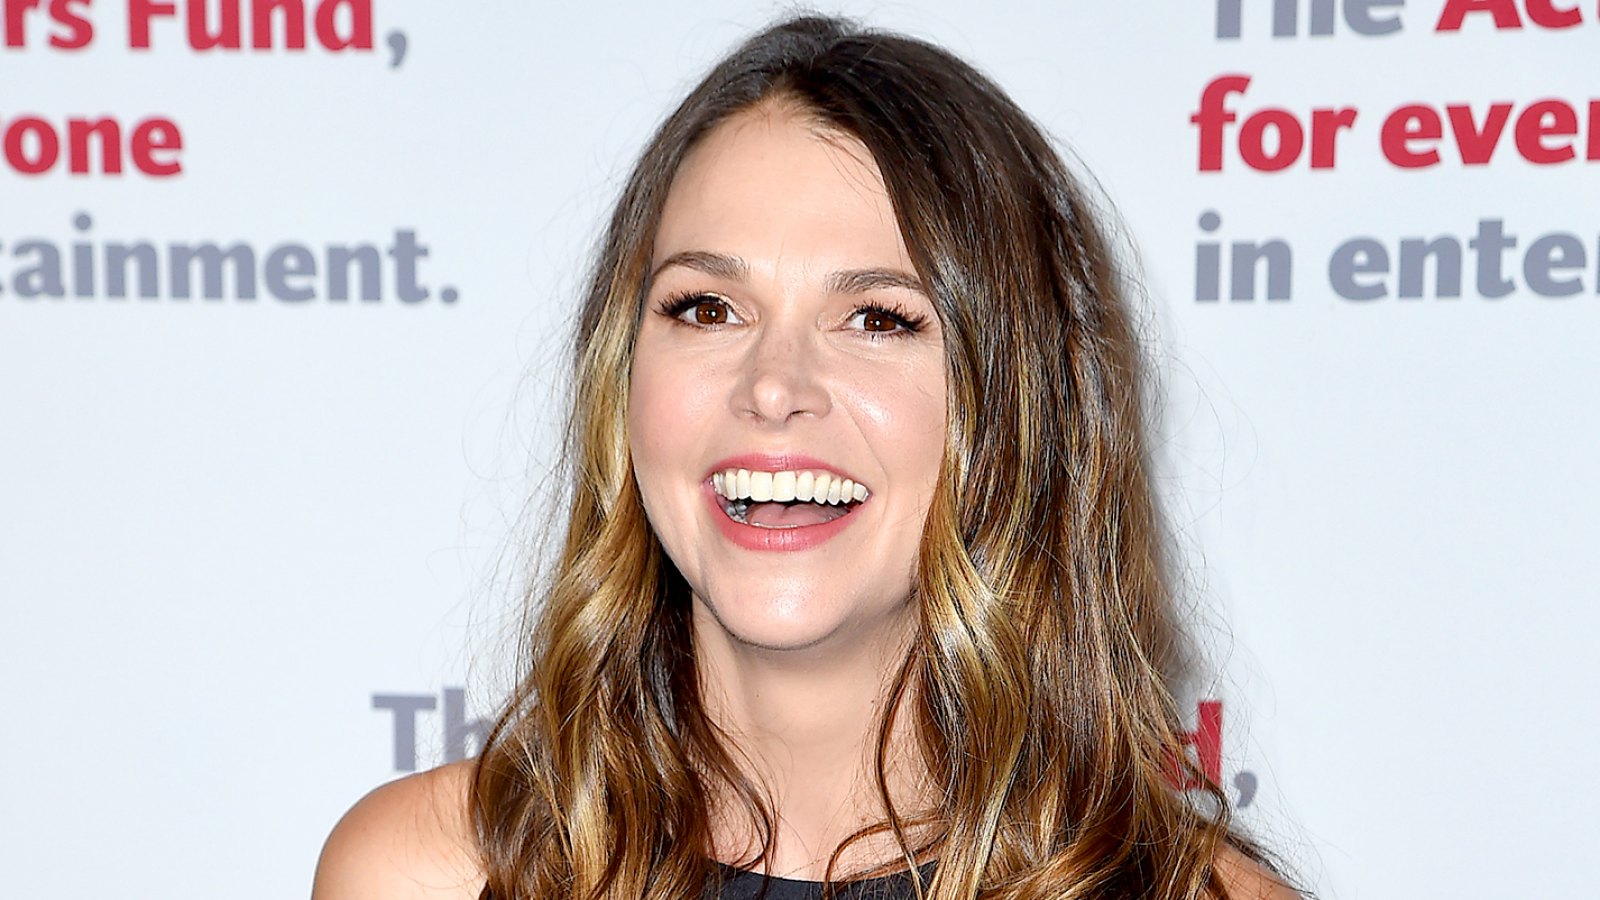 Sutton Foster attends The Actors Fund 2016 Gala at Marriott Marquis Times Square on April 25, 2016.